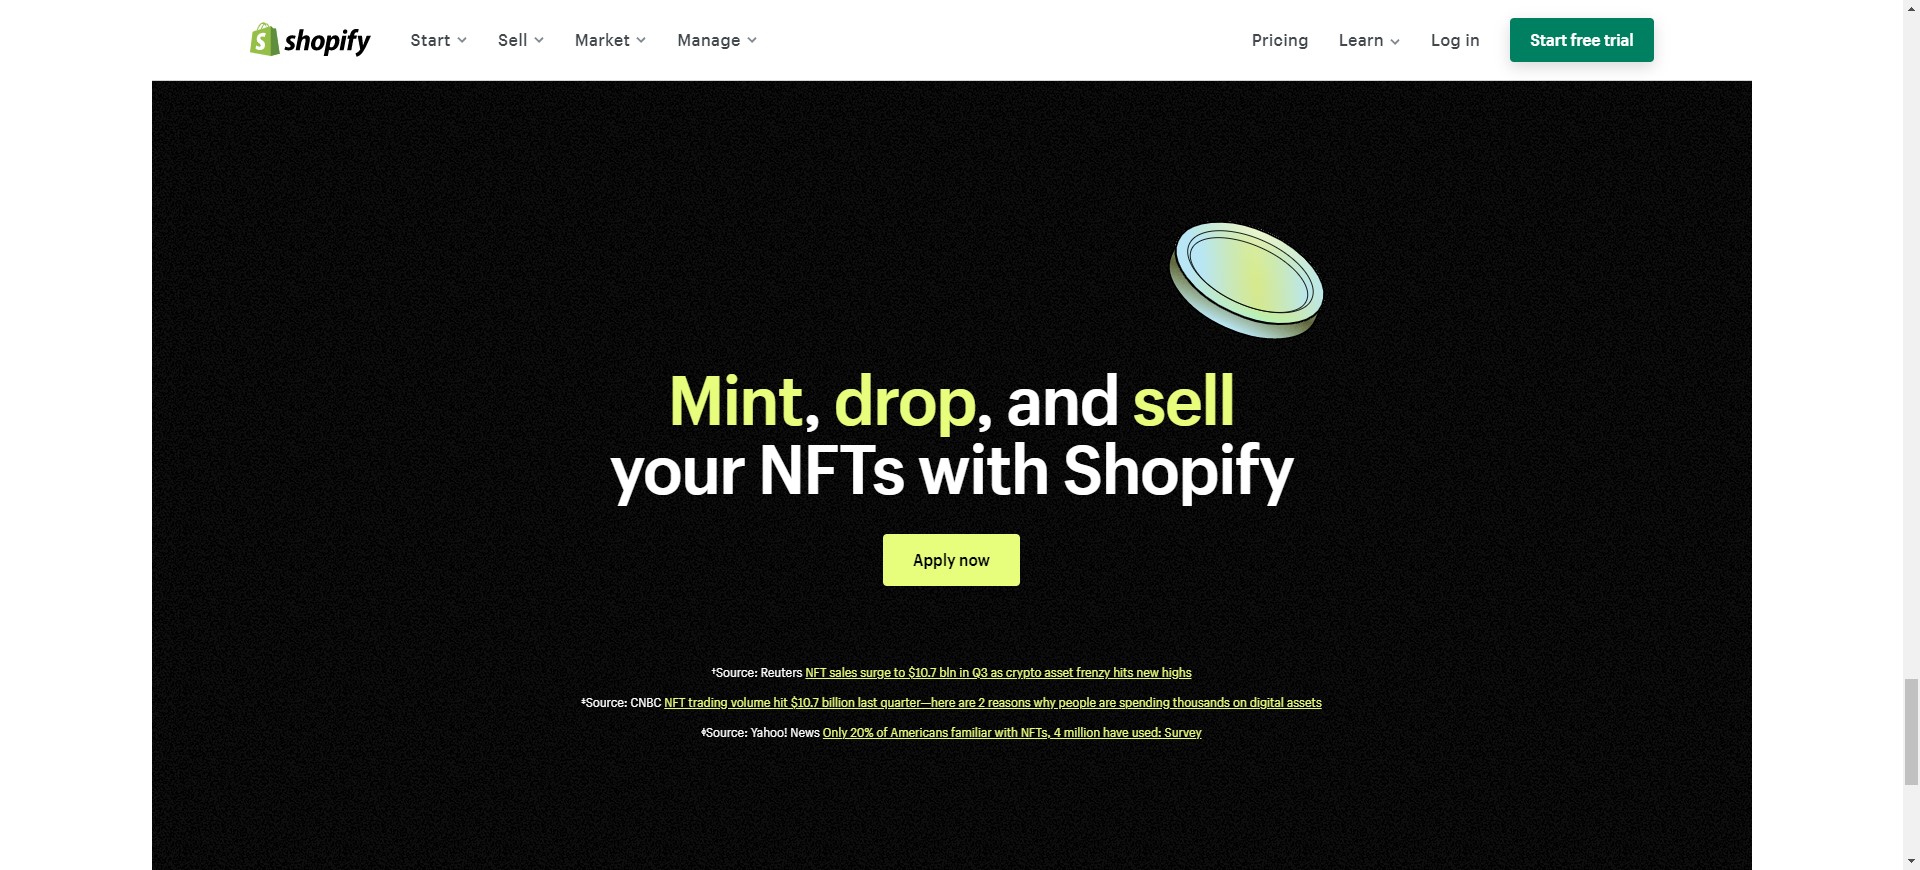 Shopify launches NFT product sales service!